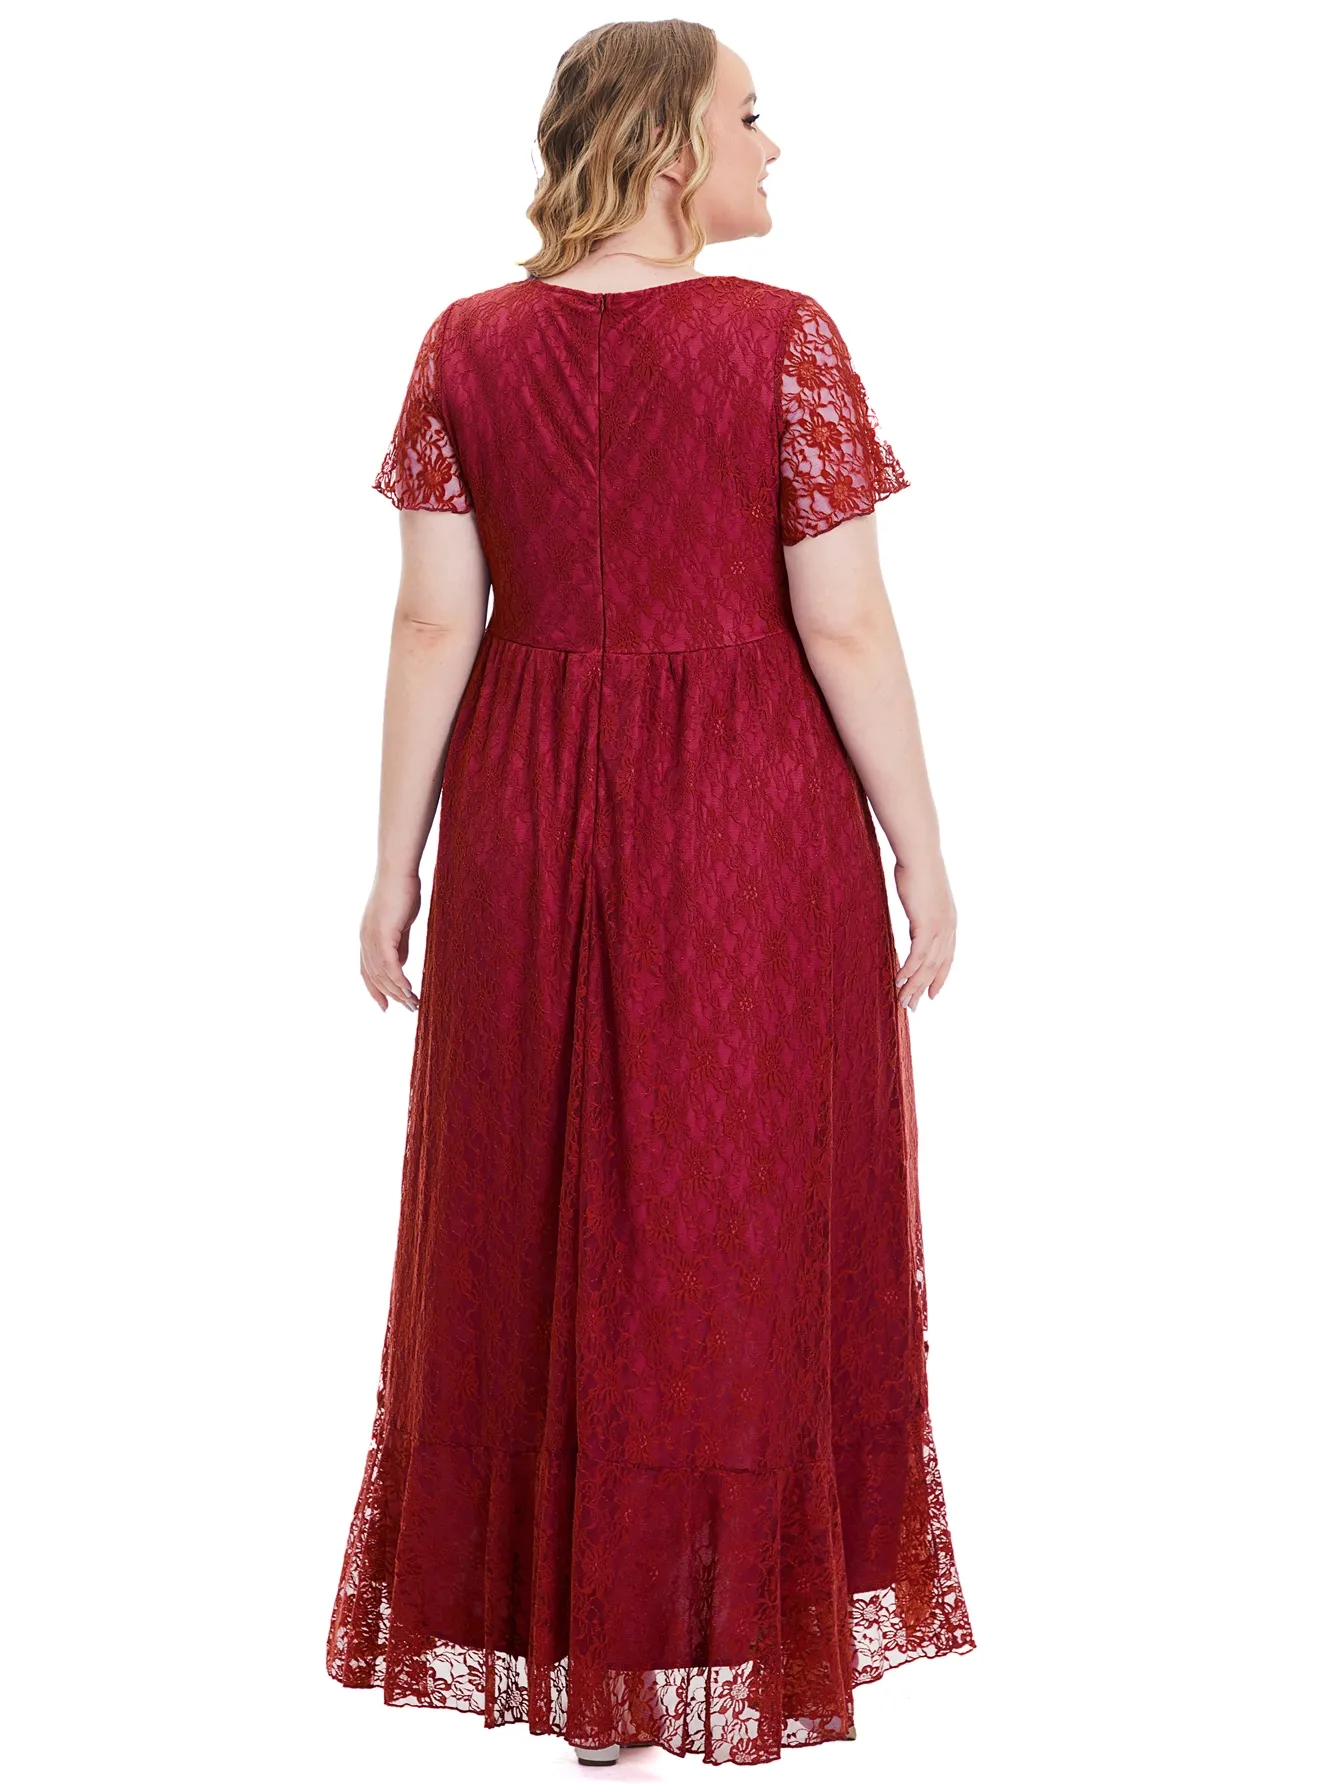 Plus Size High Quality Elegant Evening Party Wedding Lace Dresses For Women